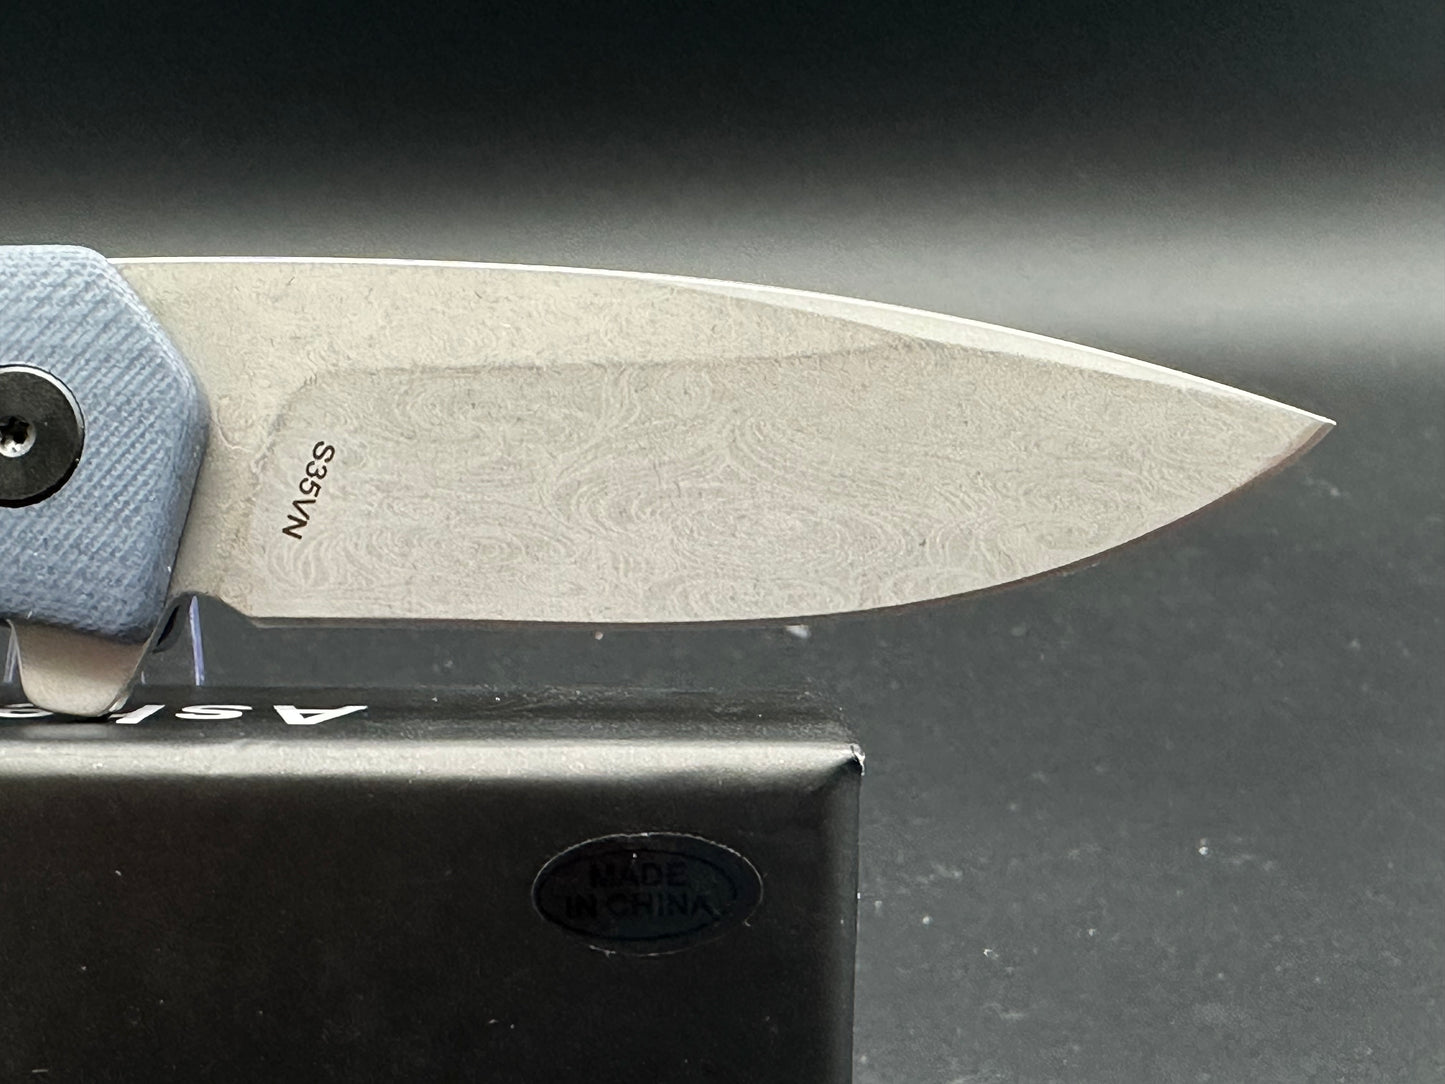 Asher Knives Spiro (Factory second) sea of snakes etch on the blade and clip grey scales